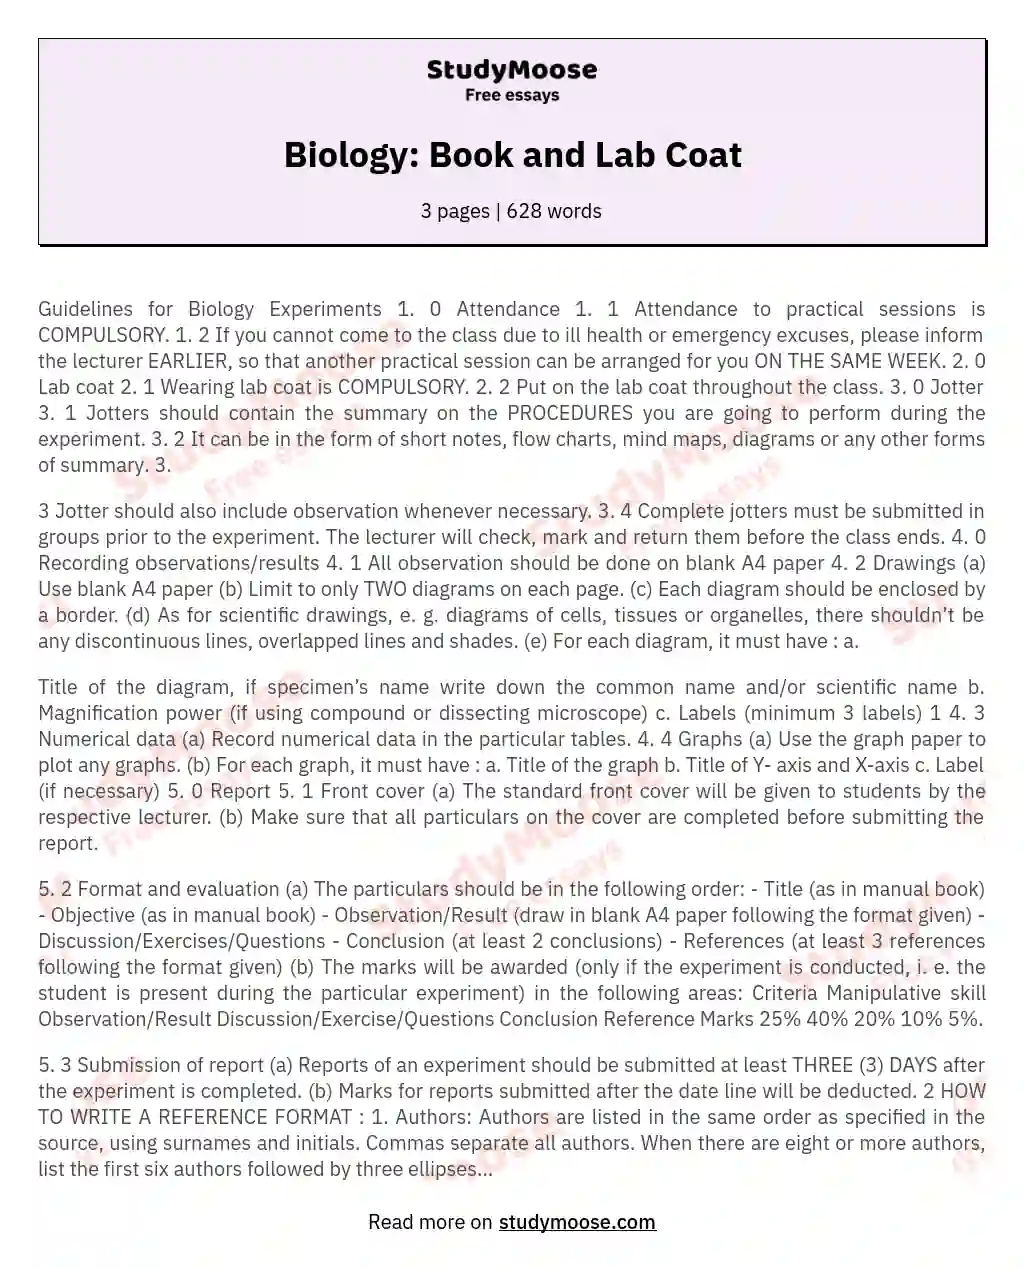 Biology: Book and Lab Coat essay